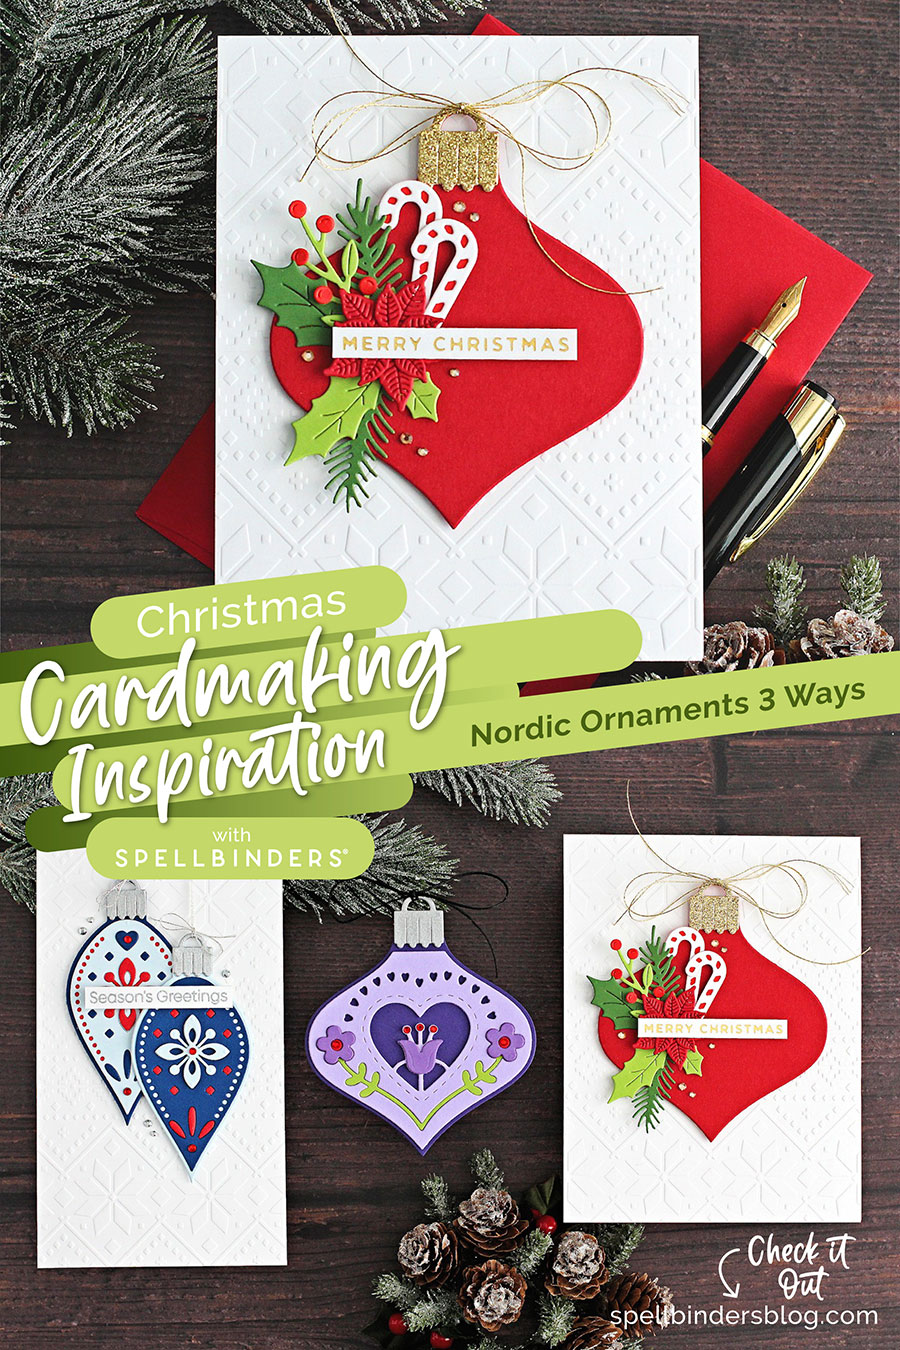 Spellbinders Nordic Ornaments 3 Ways Christmas Cardmaking With Michelle Short 